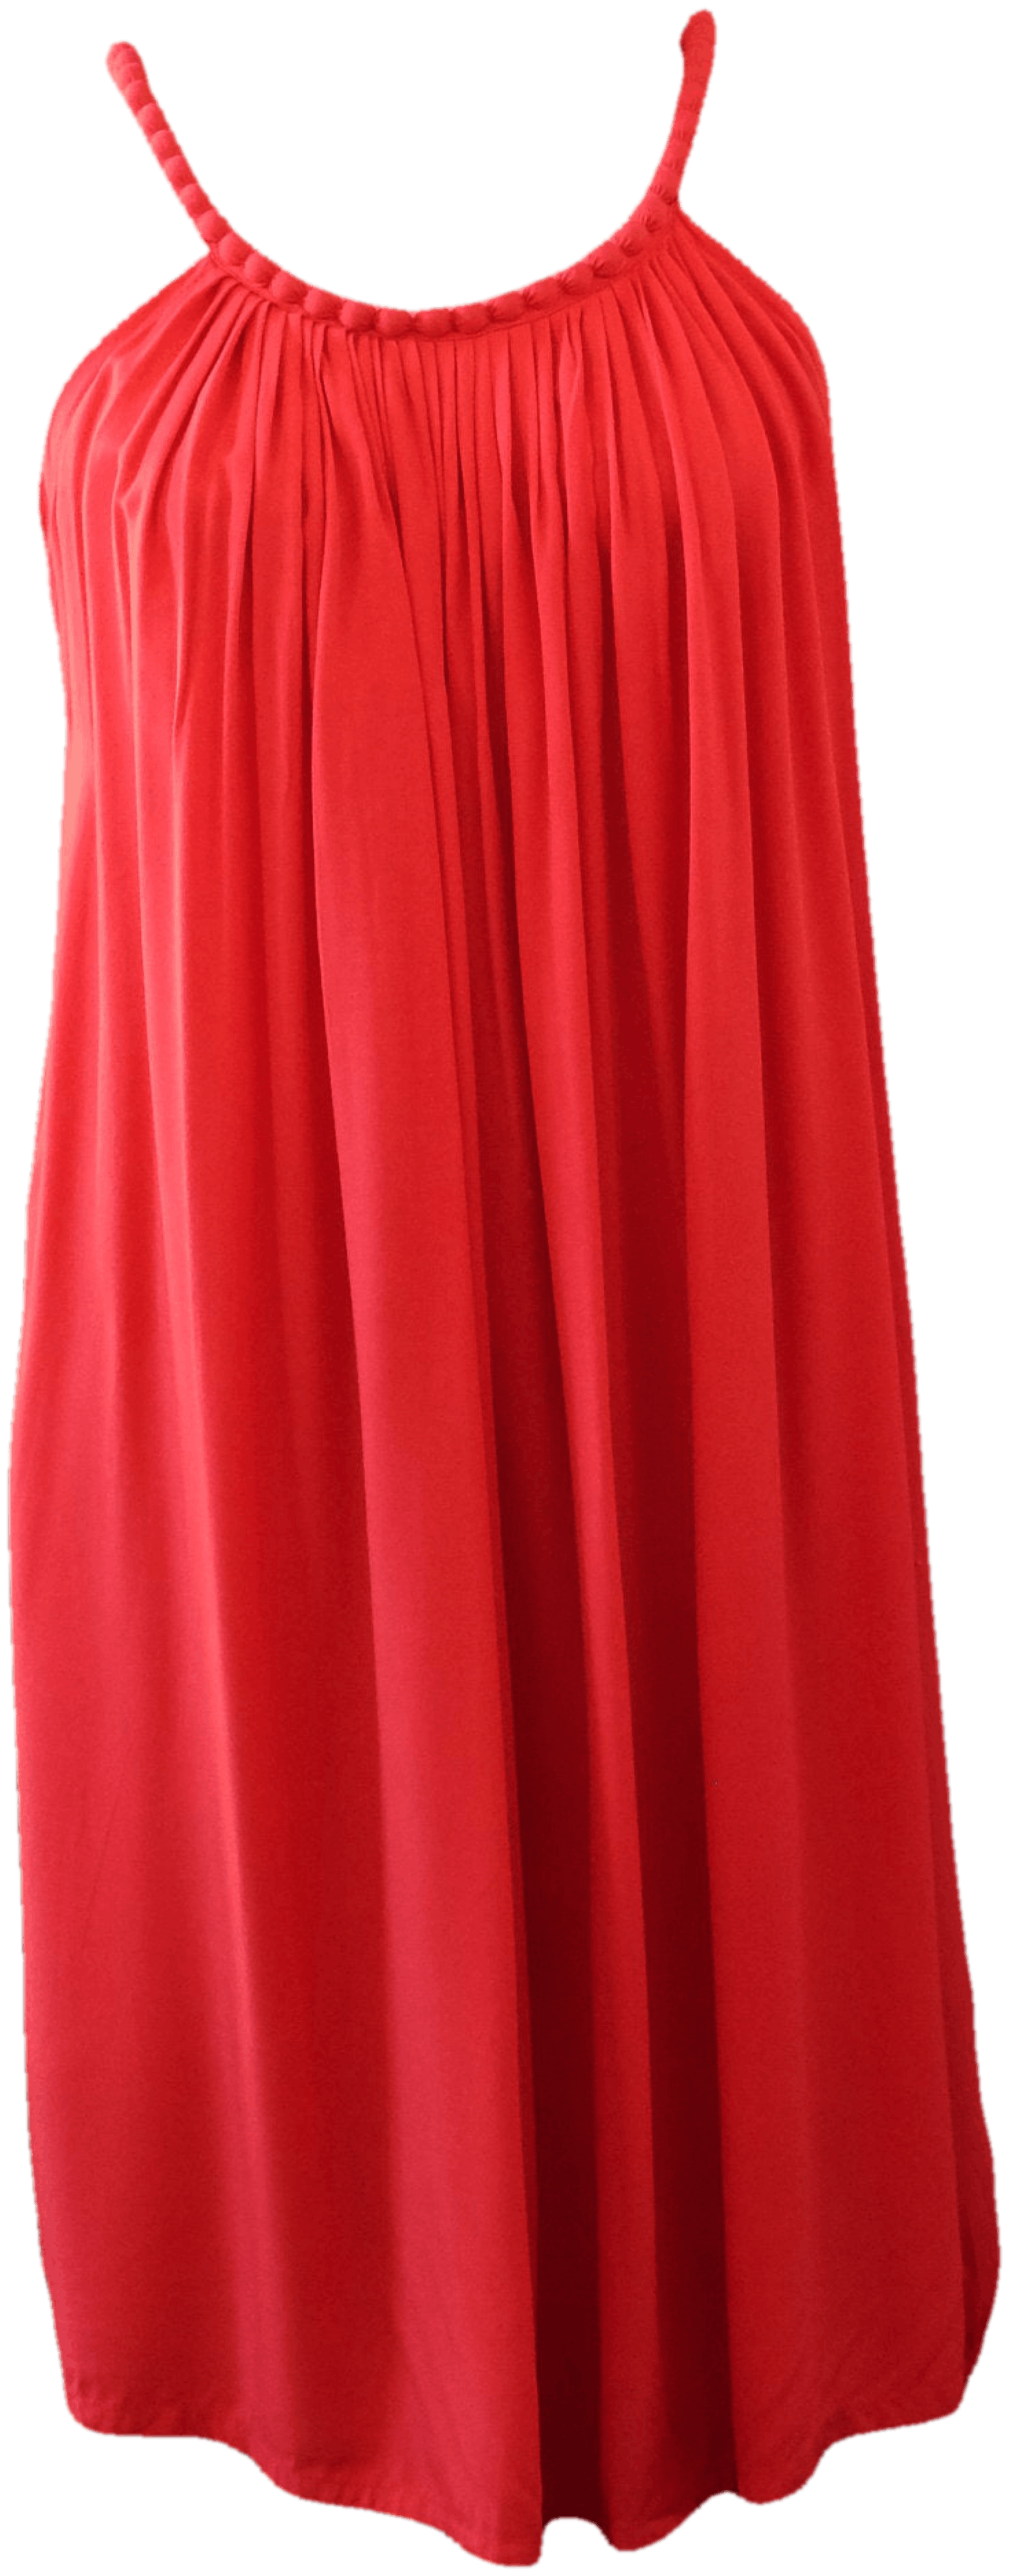 Vintage Red Rayon Dress | Shop THRILLING